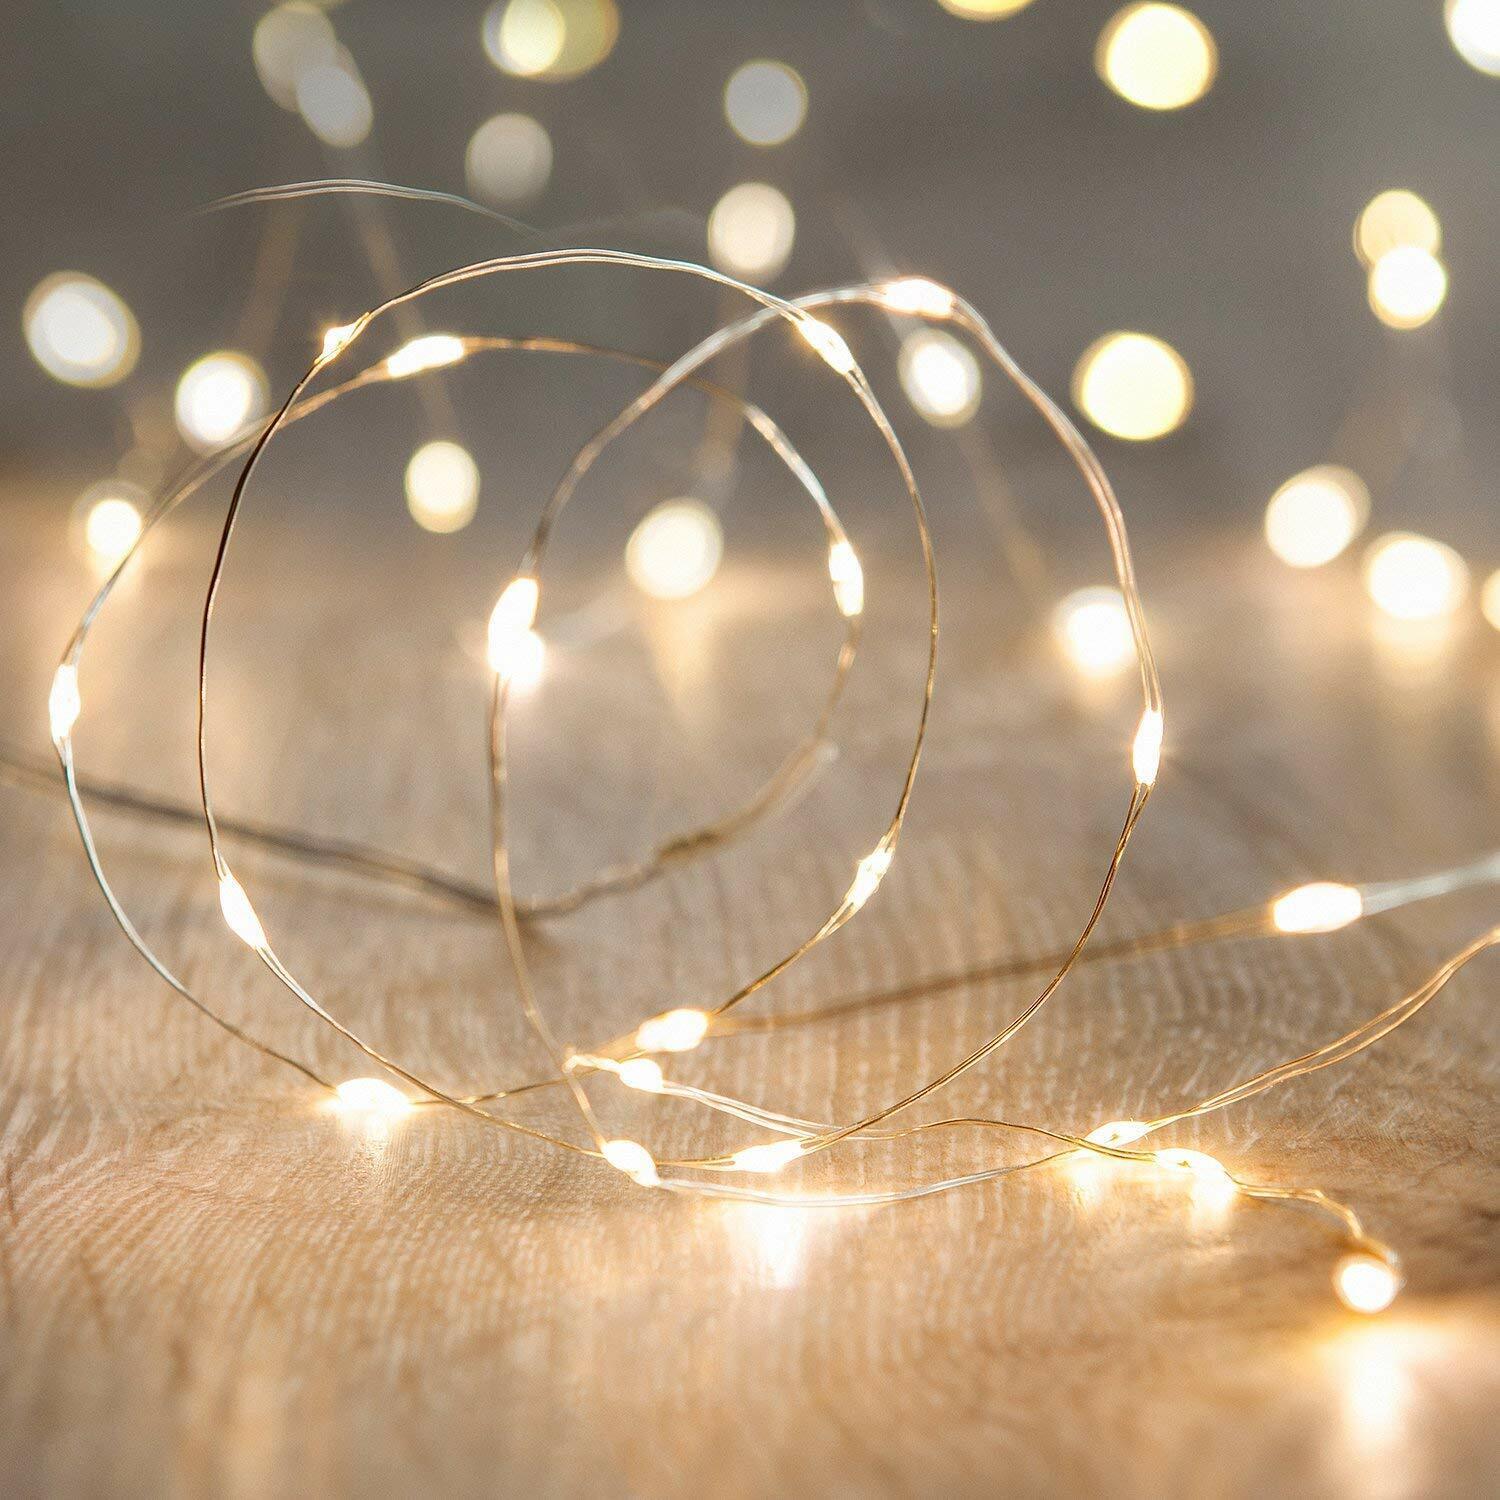 50 LED Fairy String Lights Battery Operated Warm White for Garden Party  Wedding 663185831267 | eBay